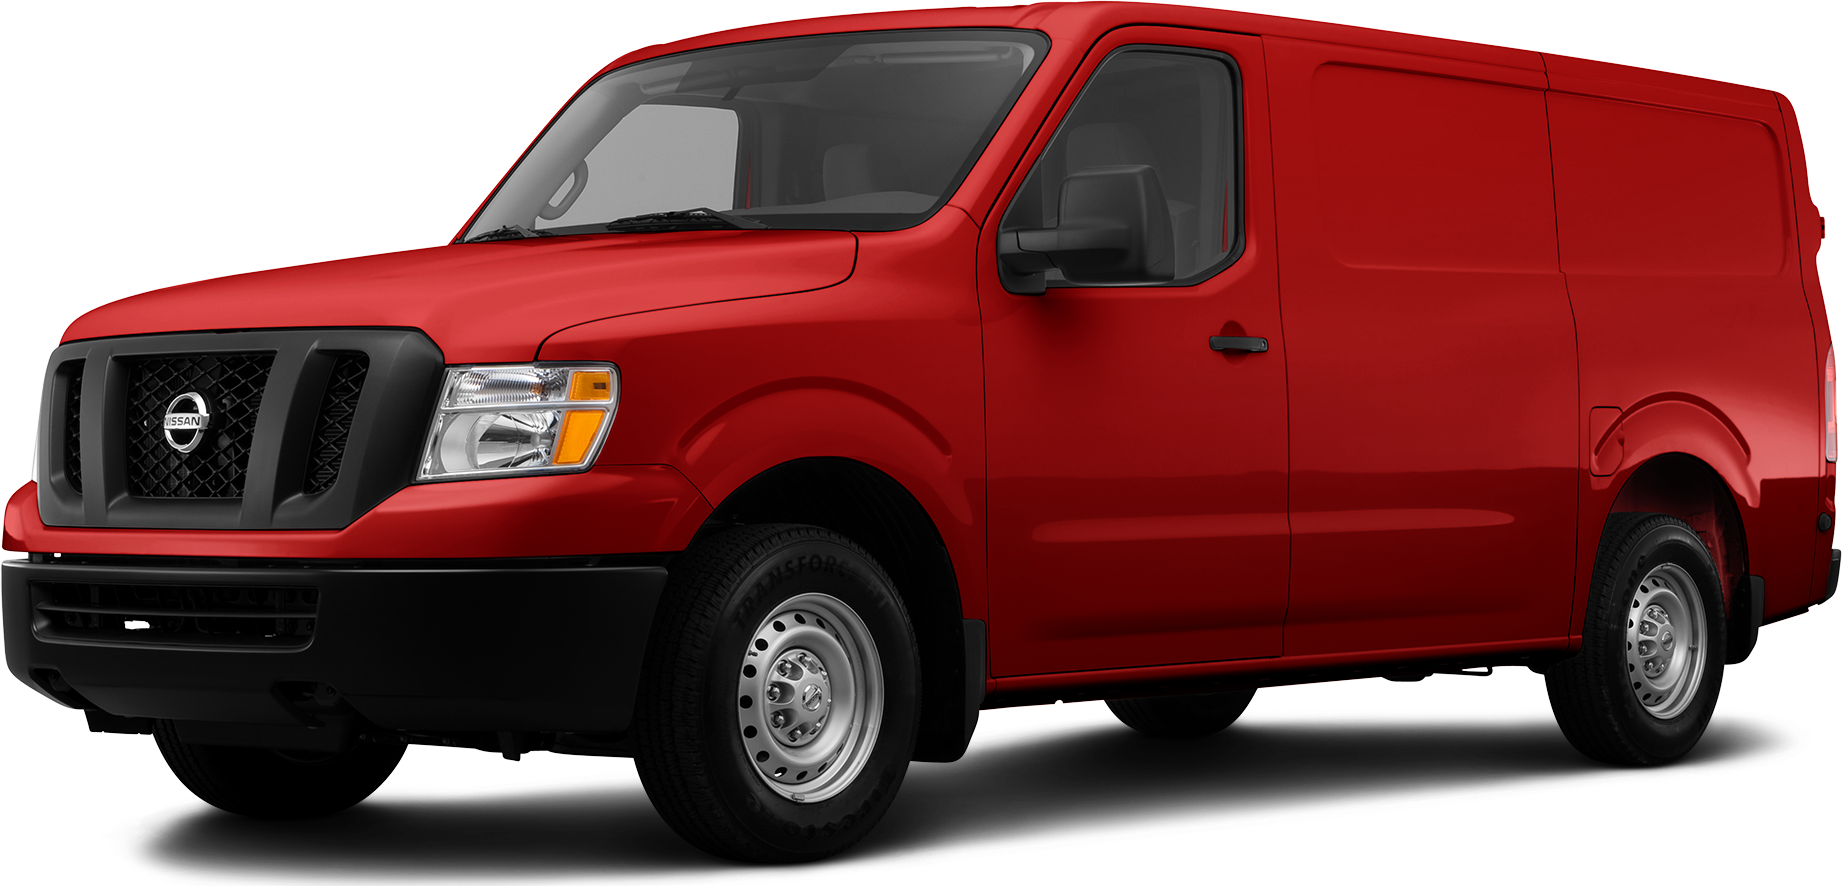 2014 Nissan NV2500 HD Cargo Price, Value, Ratings & Reviews